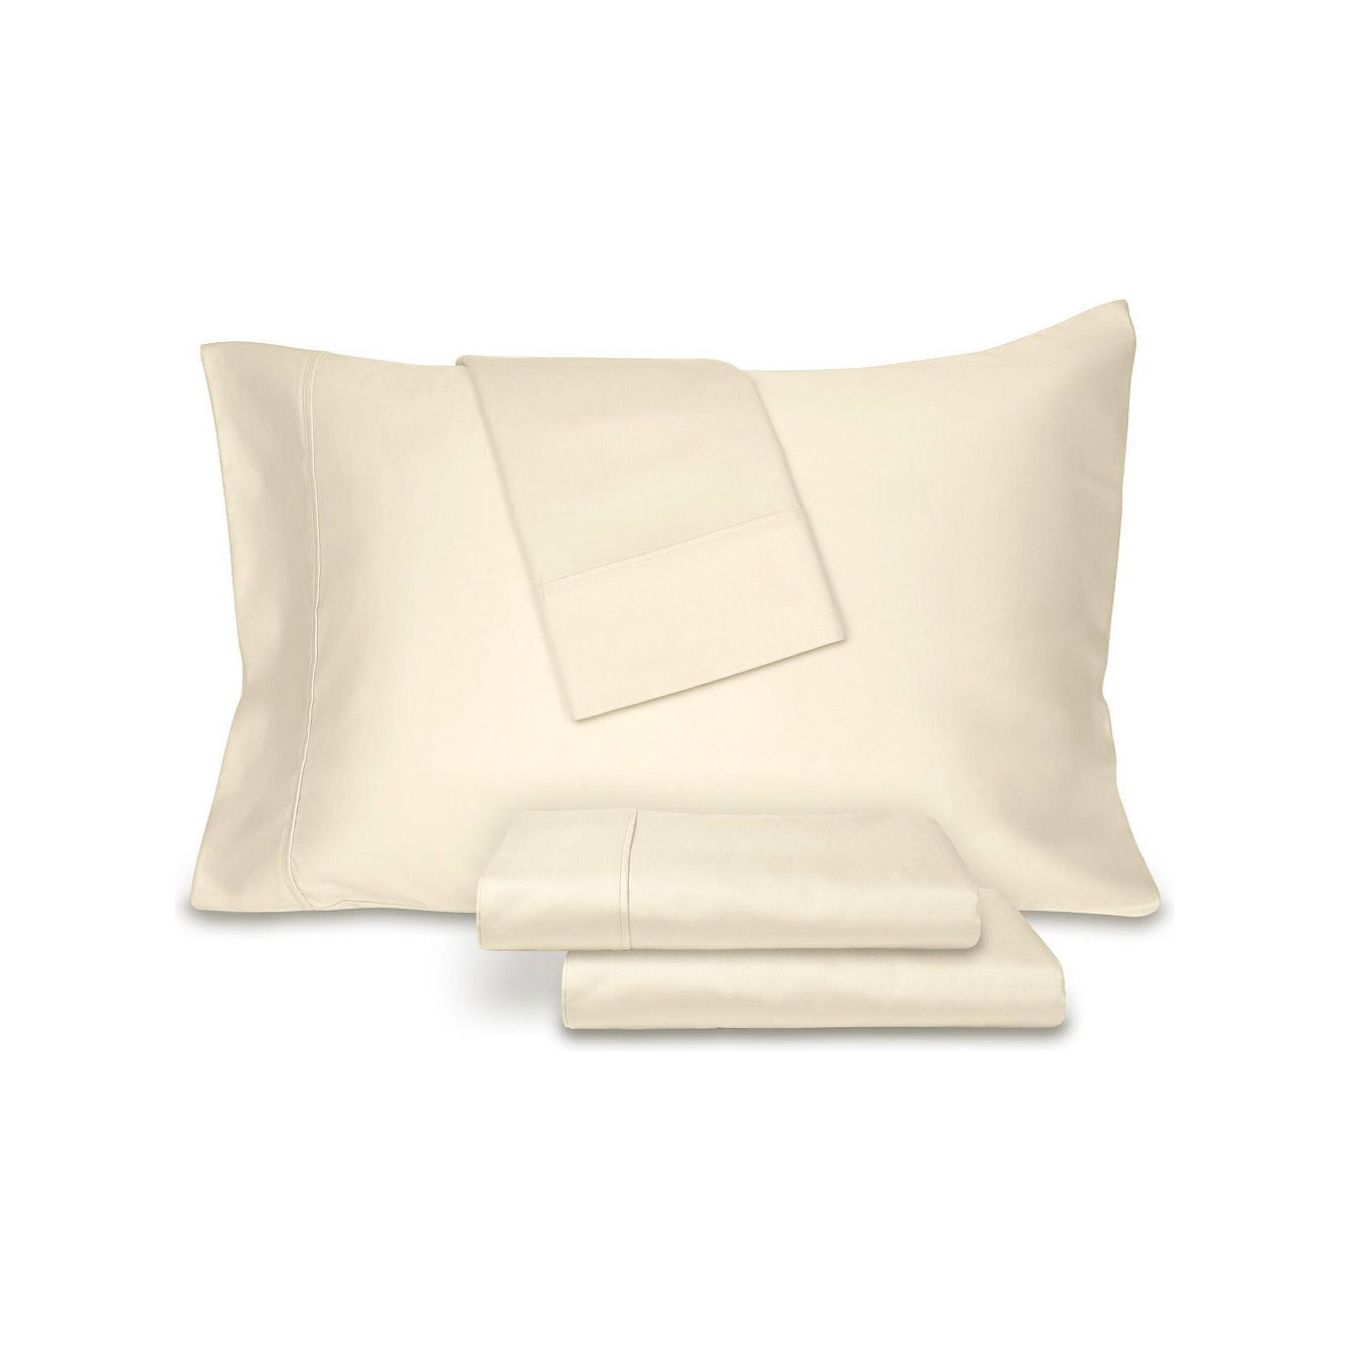 AQ Textiles Ultra Lux Cotton 800 Thread Count 4 Pc. Sheet Set, King (Ivory) - Brandat Outlet